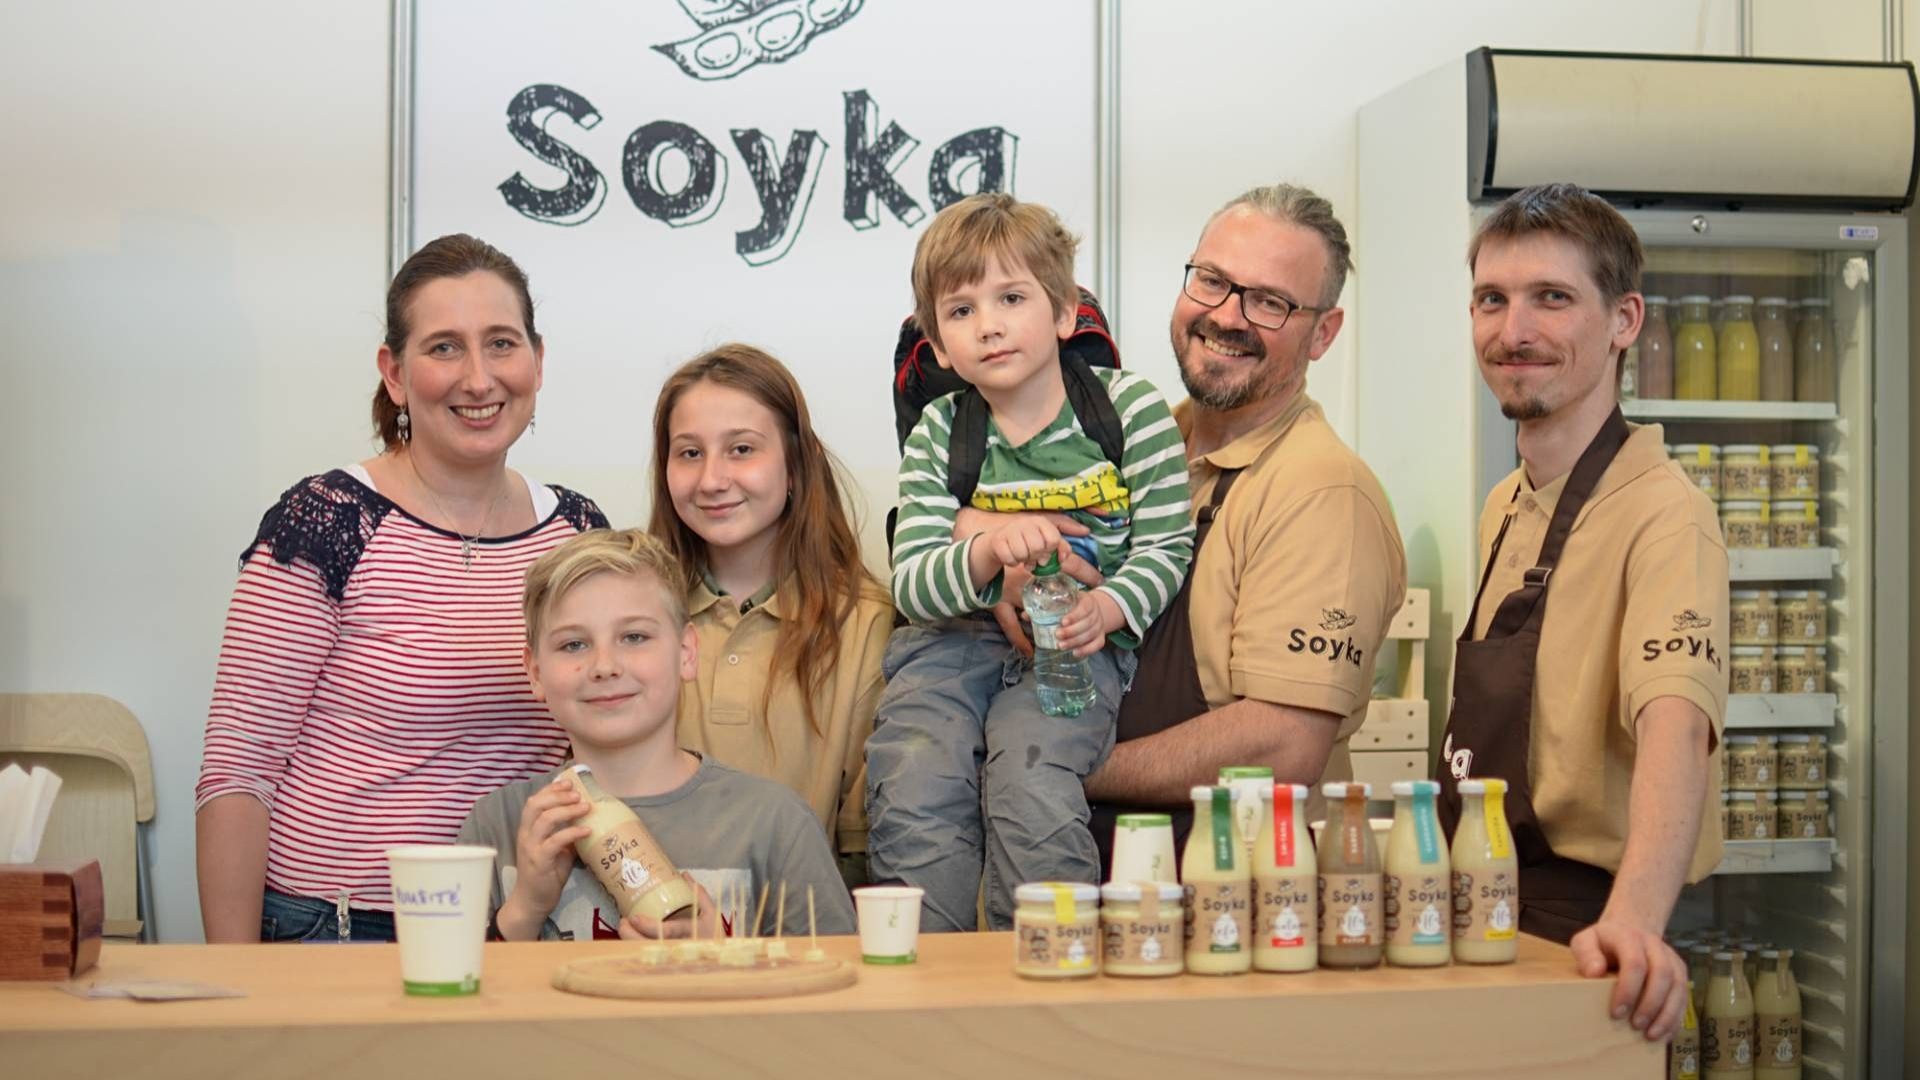 The Czech market lacked good tofu.  This is how Soyka was created, which conquers not only farmers' markets with vegan products thumbnail